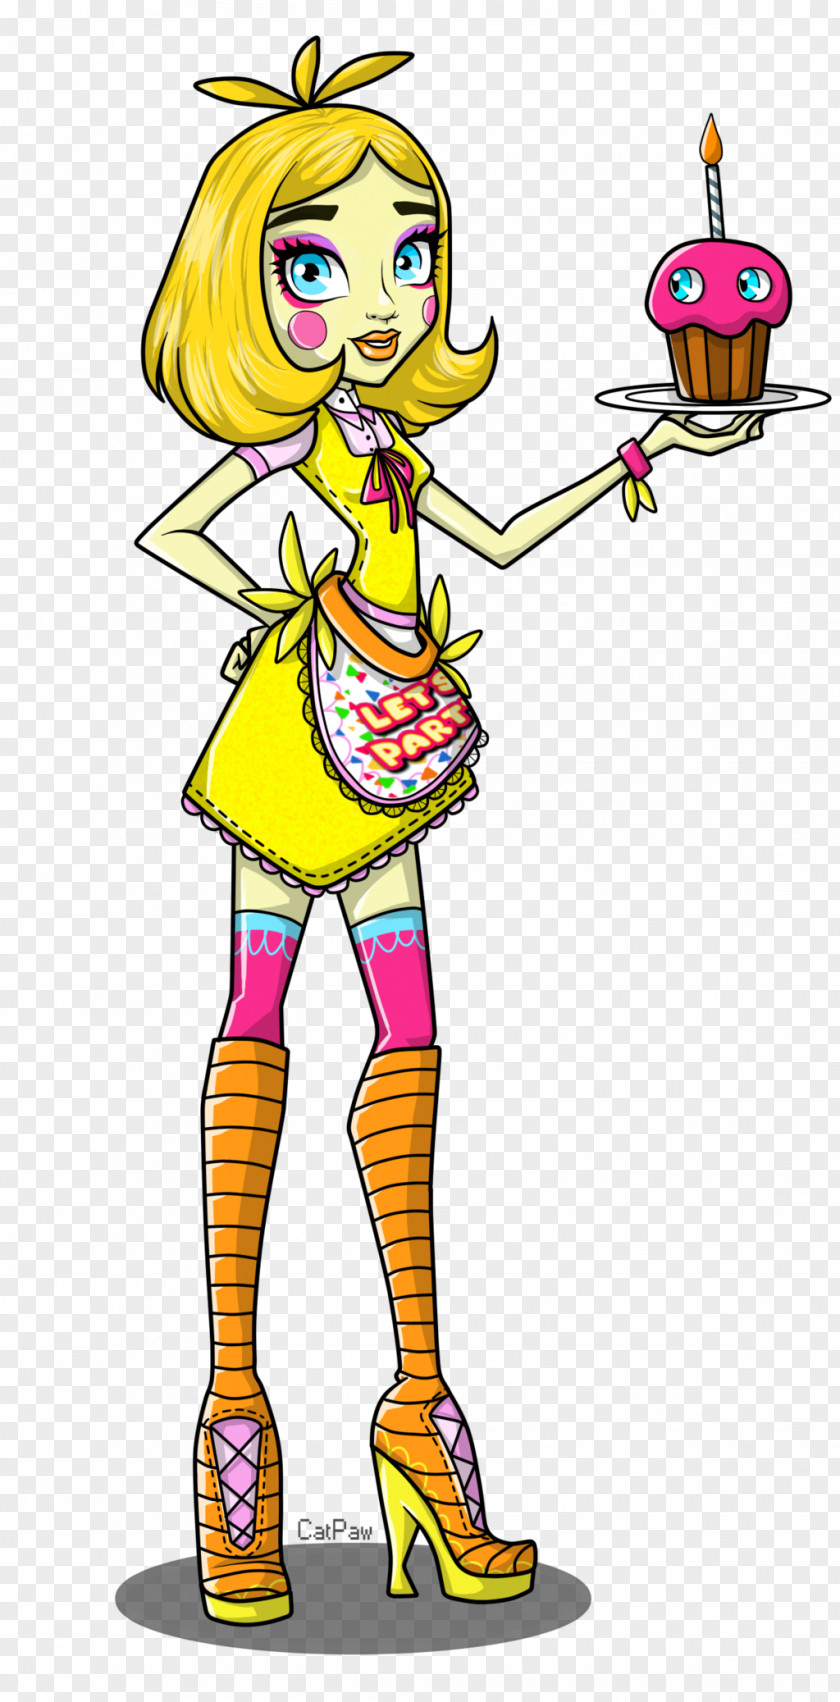 Doll Monster High Five Nights At Freddy's Clawdeen Wolf Frankie Stein PNG